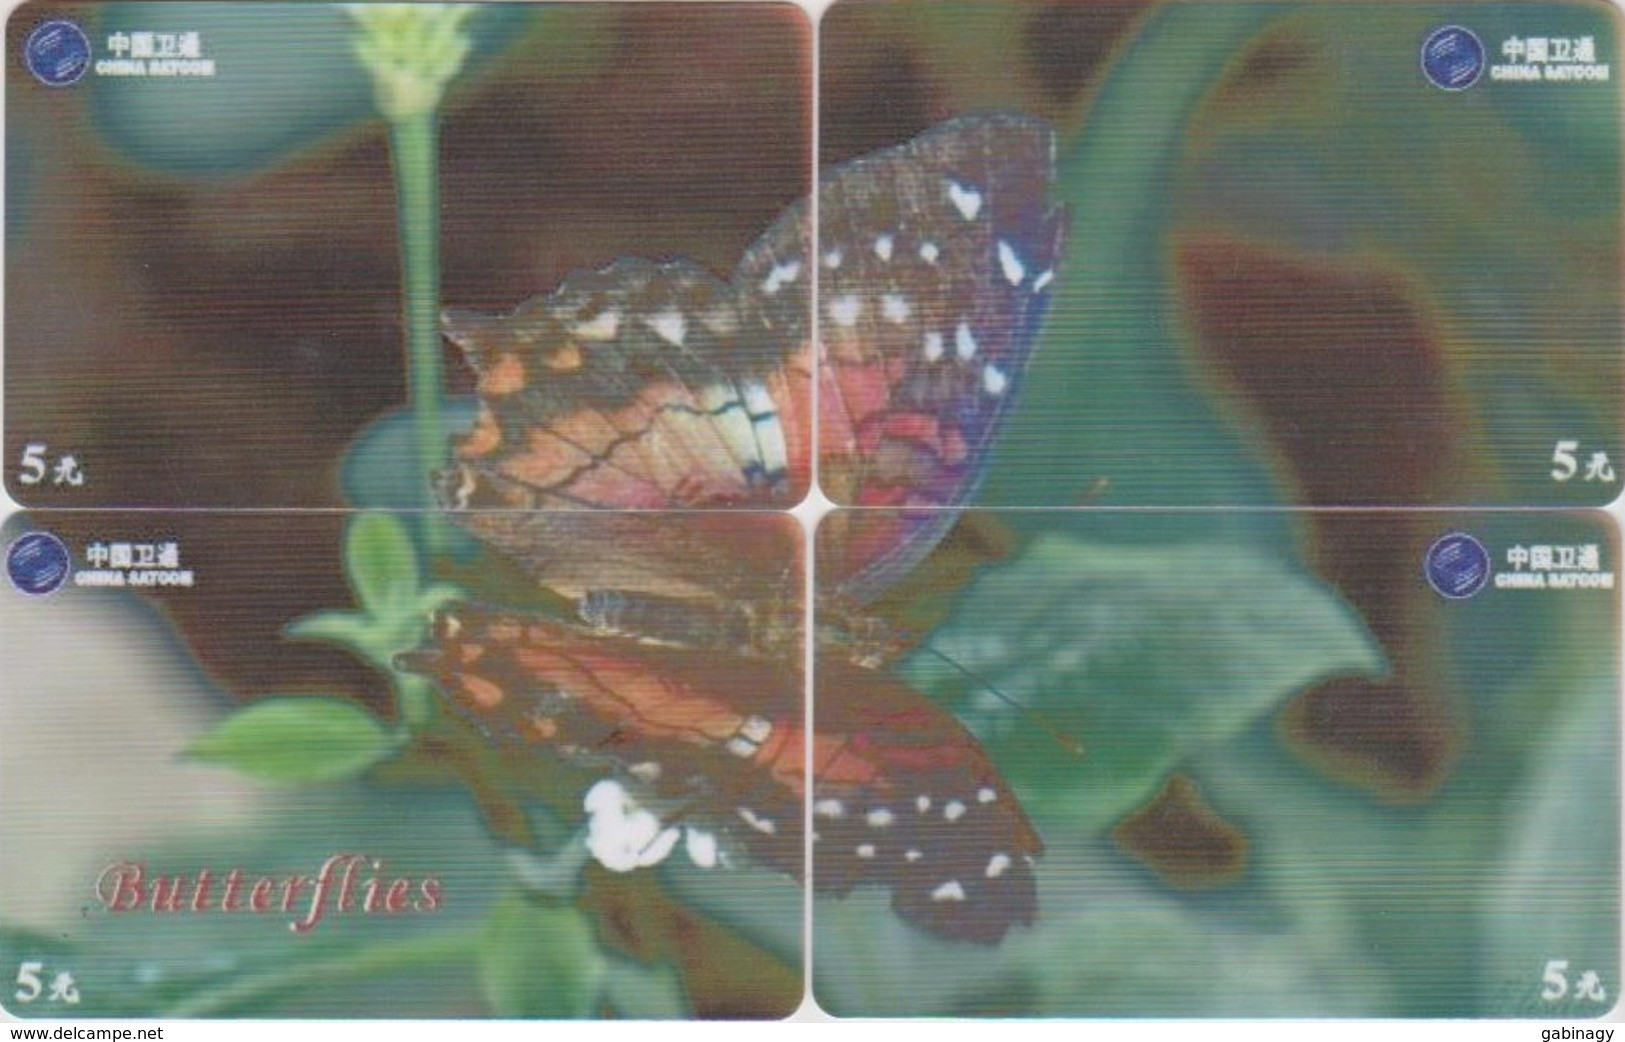 CHINA - BUTTERFLY-08 - SET OF 4 CARDS - China